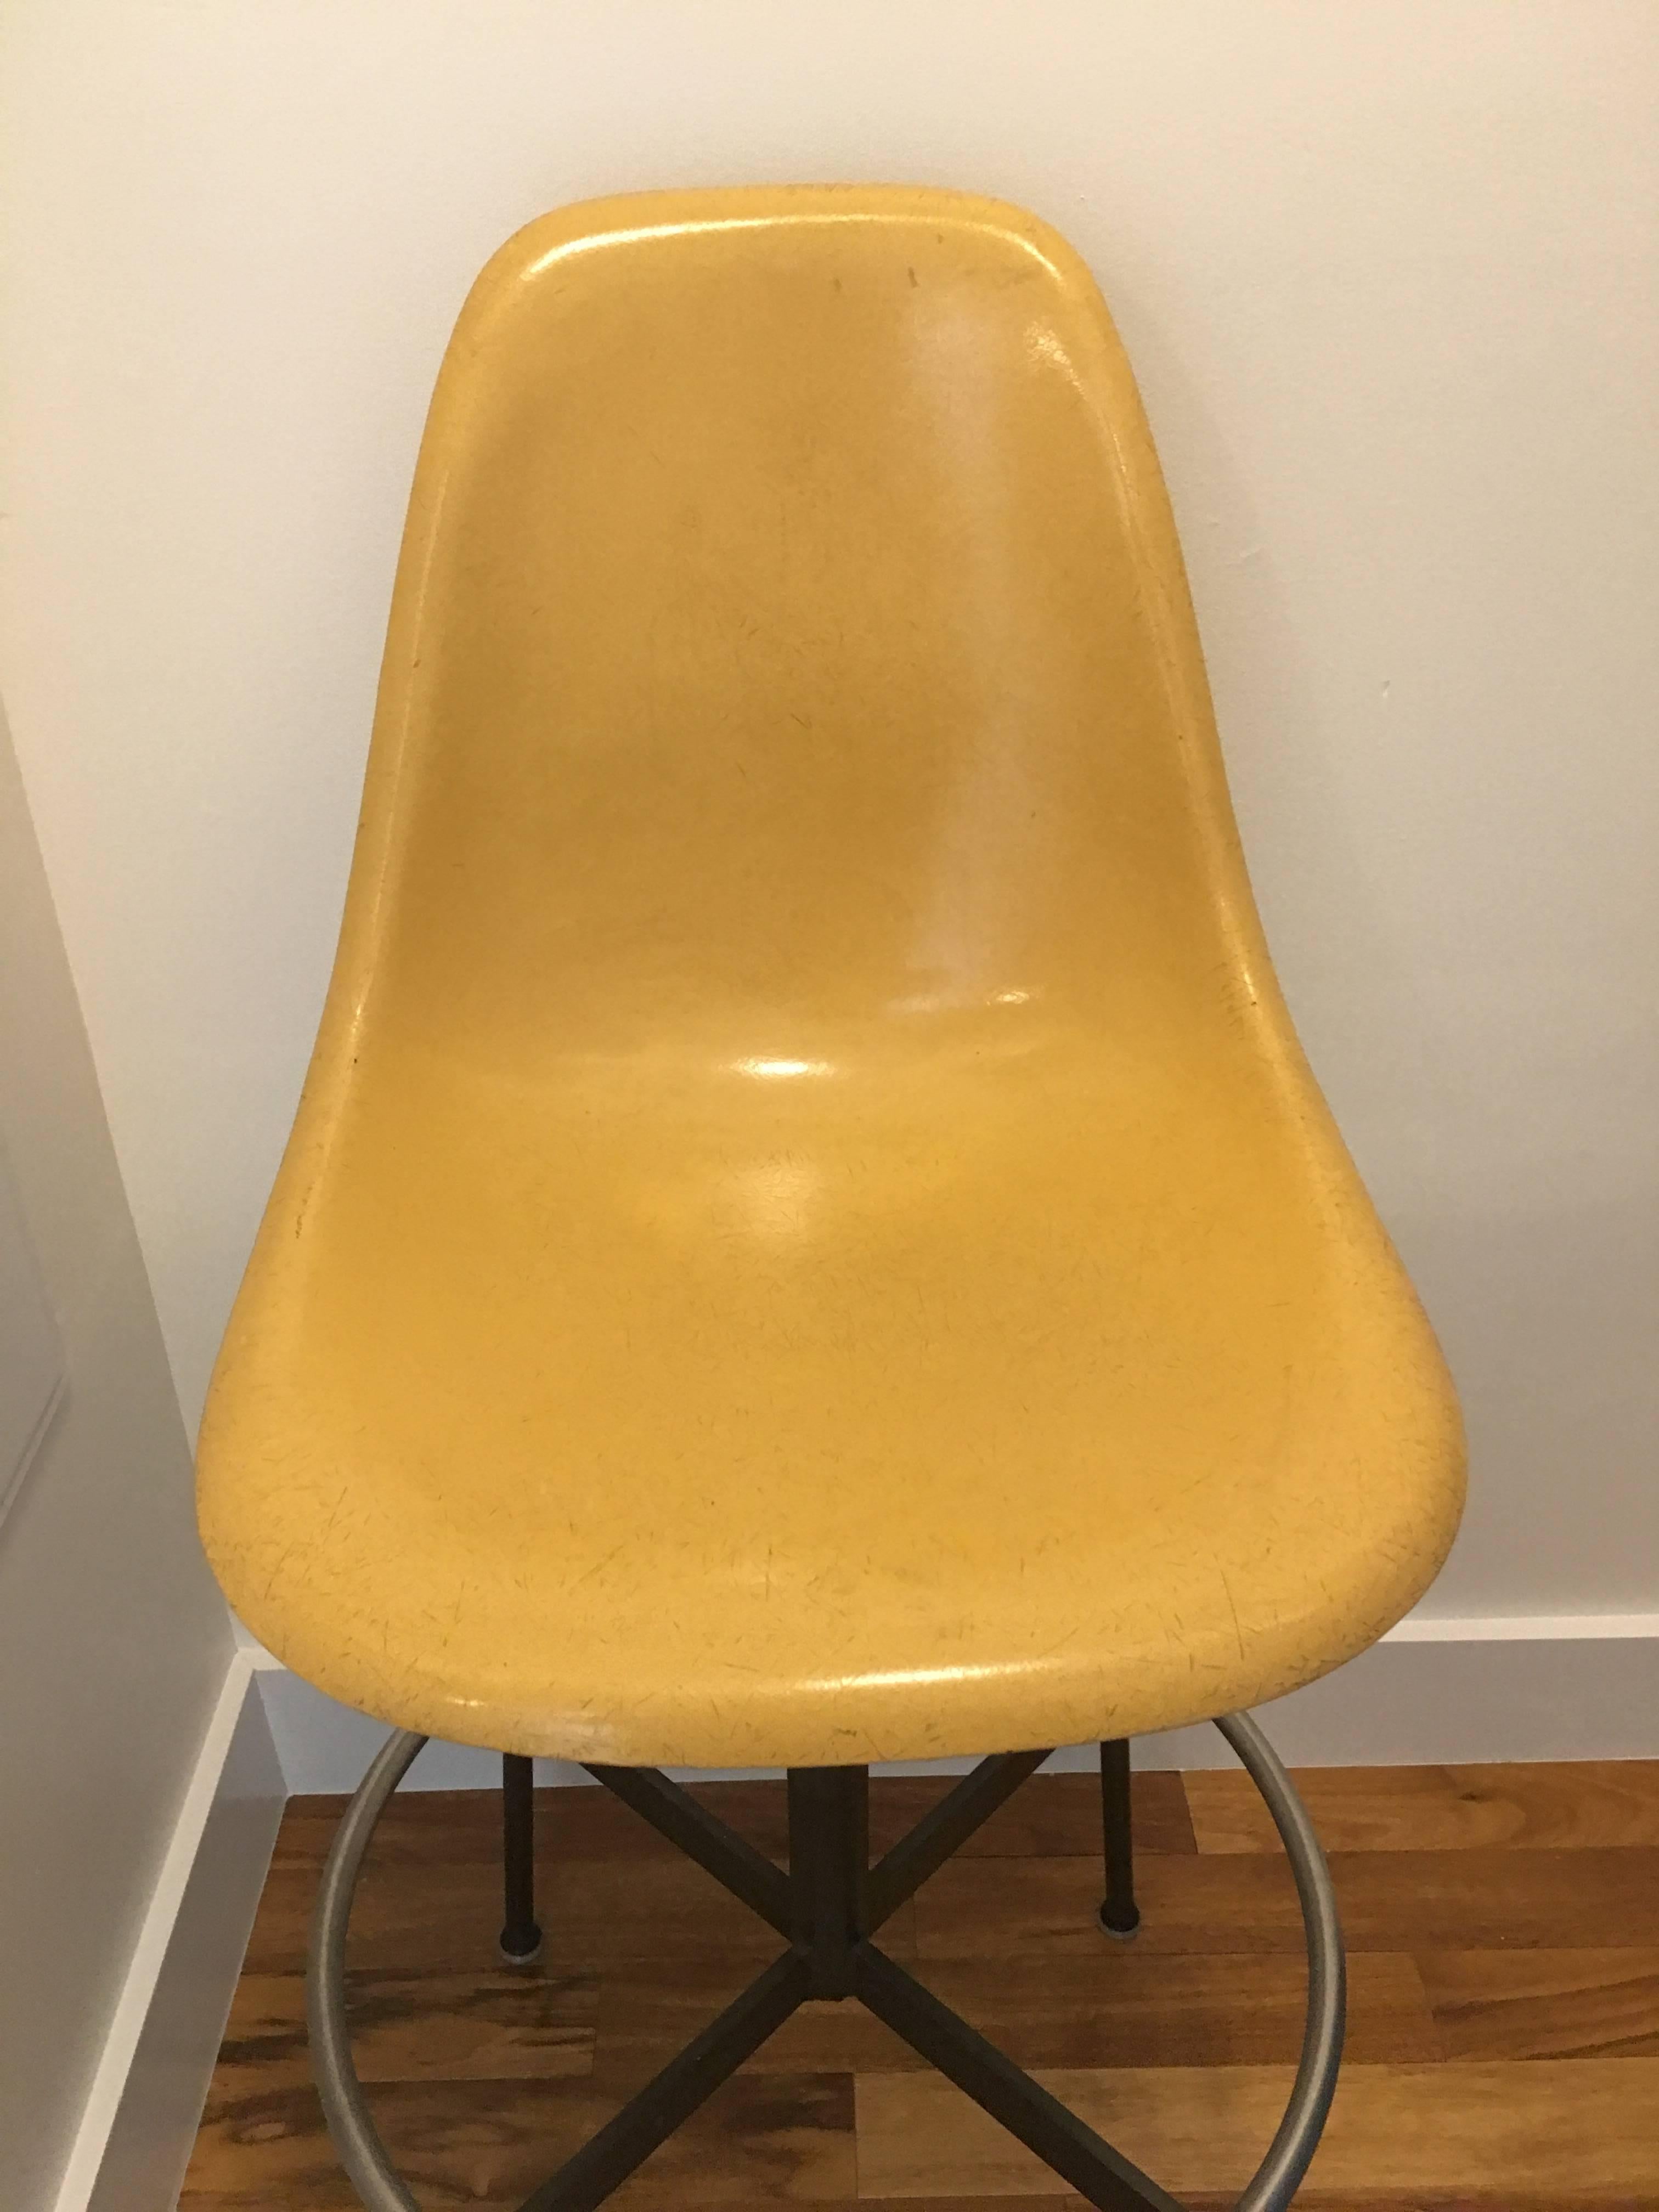 Eames for Herman Miller Architect's drafting stool or chair. Ochre colored fiberglass in excellent condition with no cracks or holes. The height is easily adjustable. Base in excellent original condition with all glides present. Nothing is missing